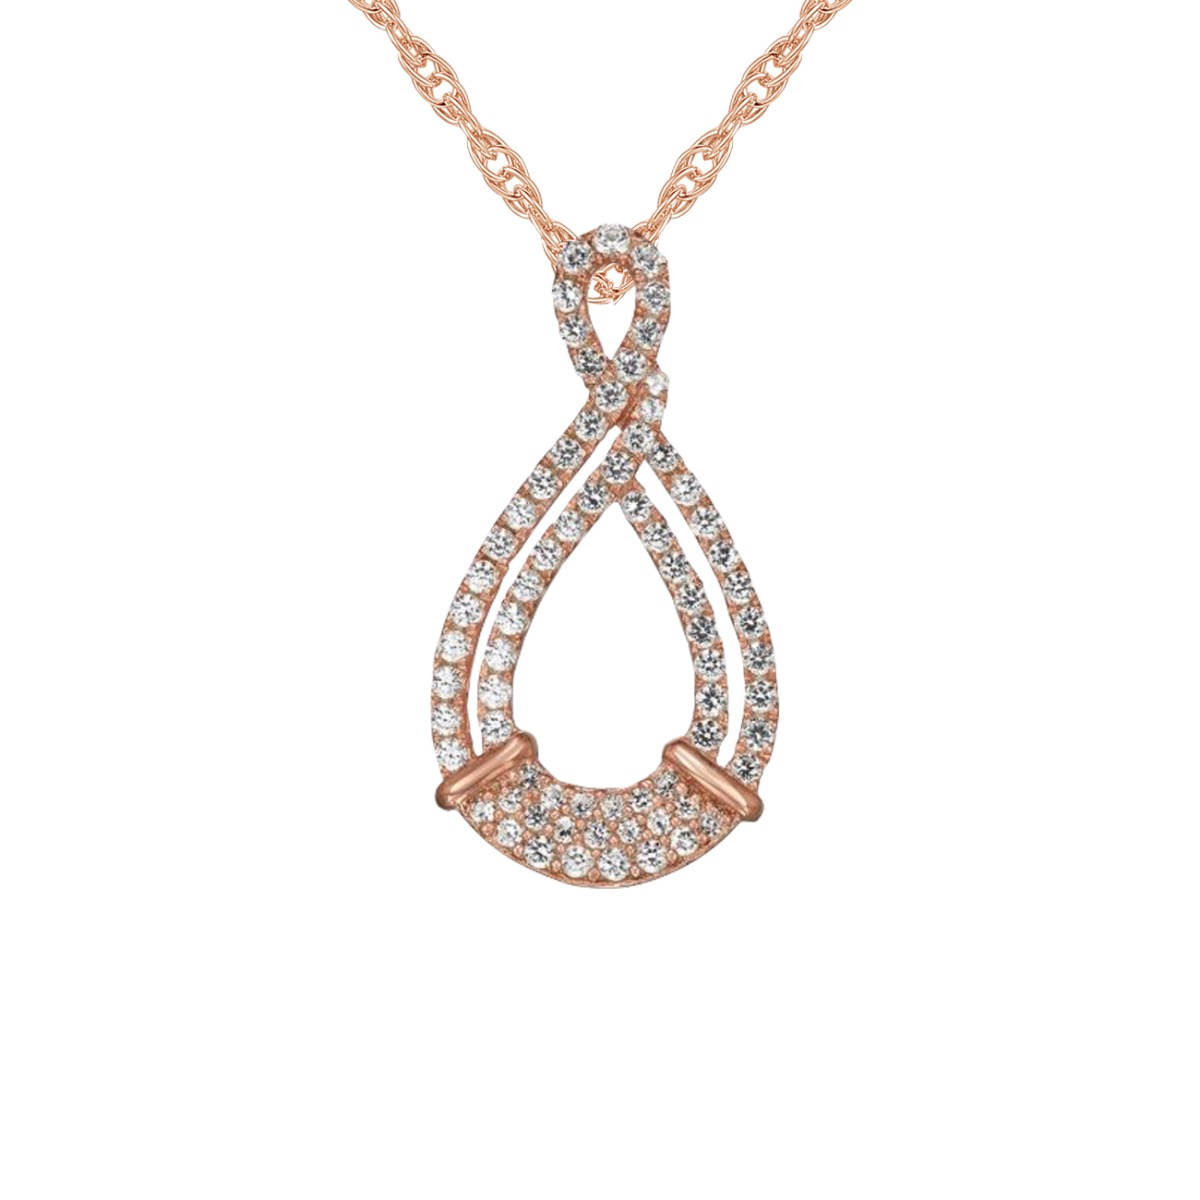 14K Rose Gold over Sterling Silver 1/3 Carat T.W. Diamond Infinity Pendant